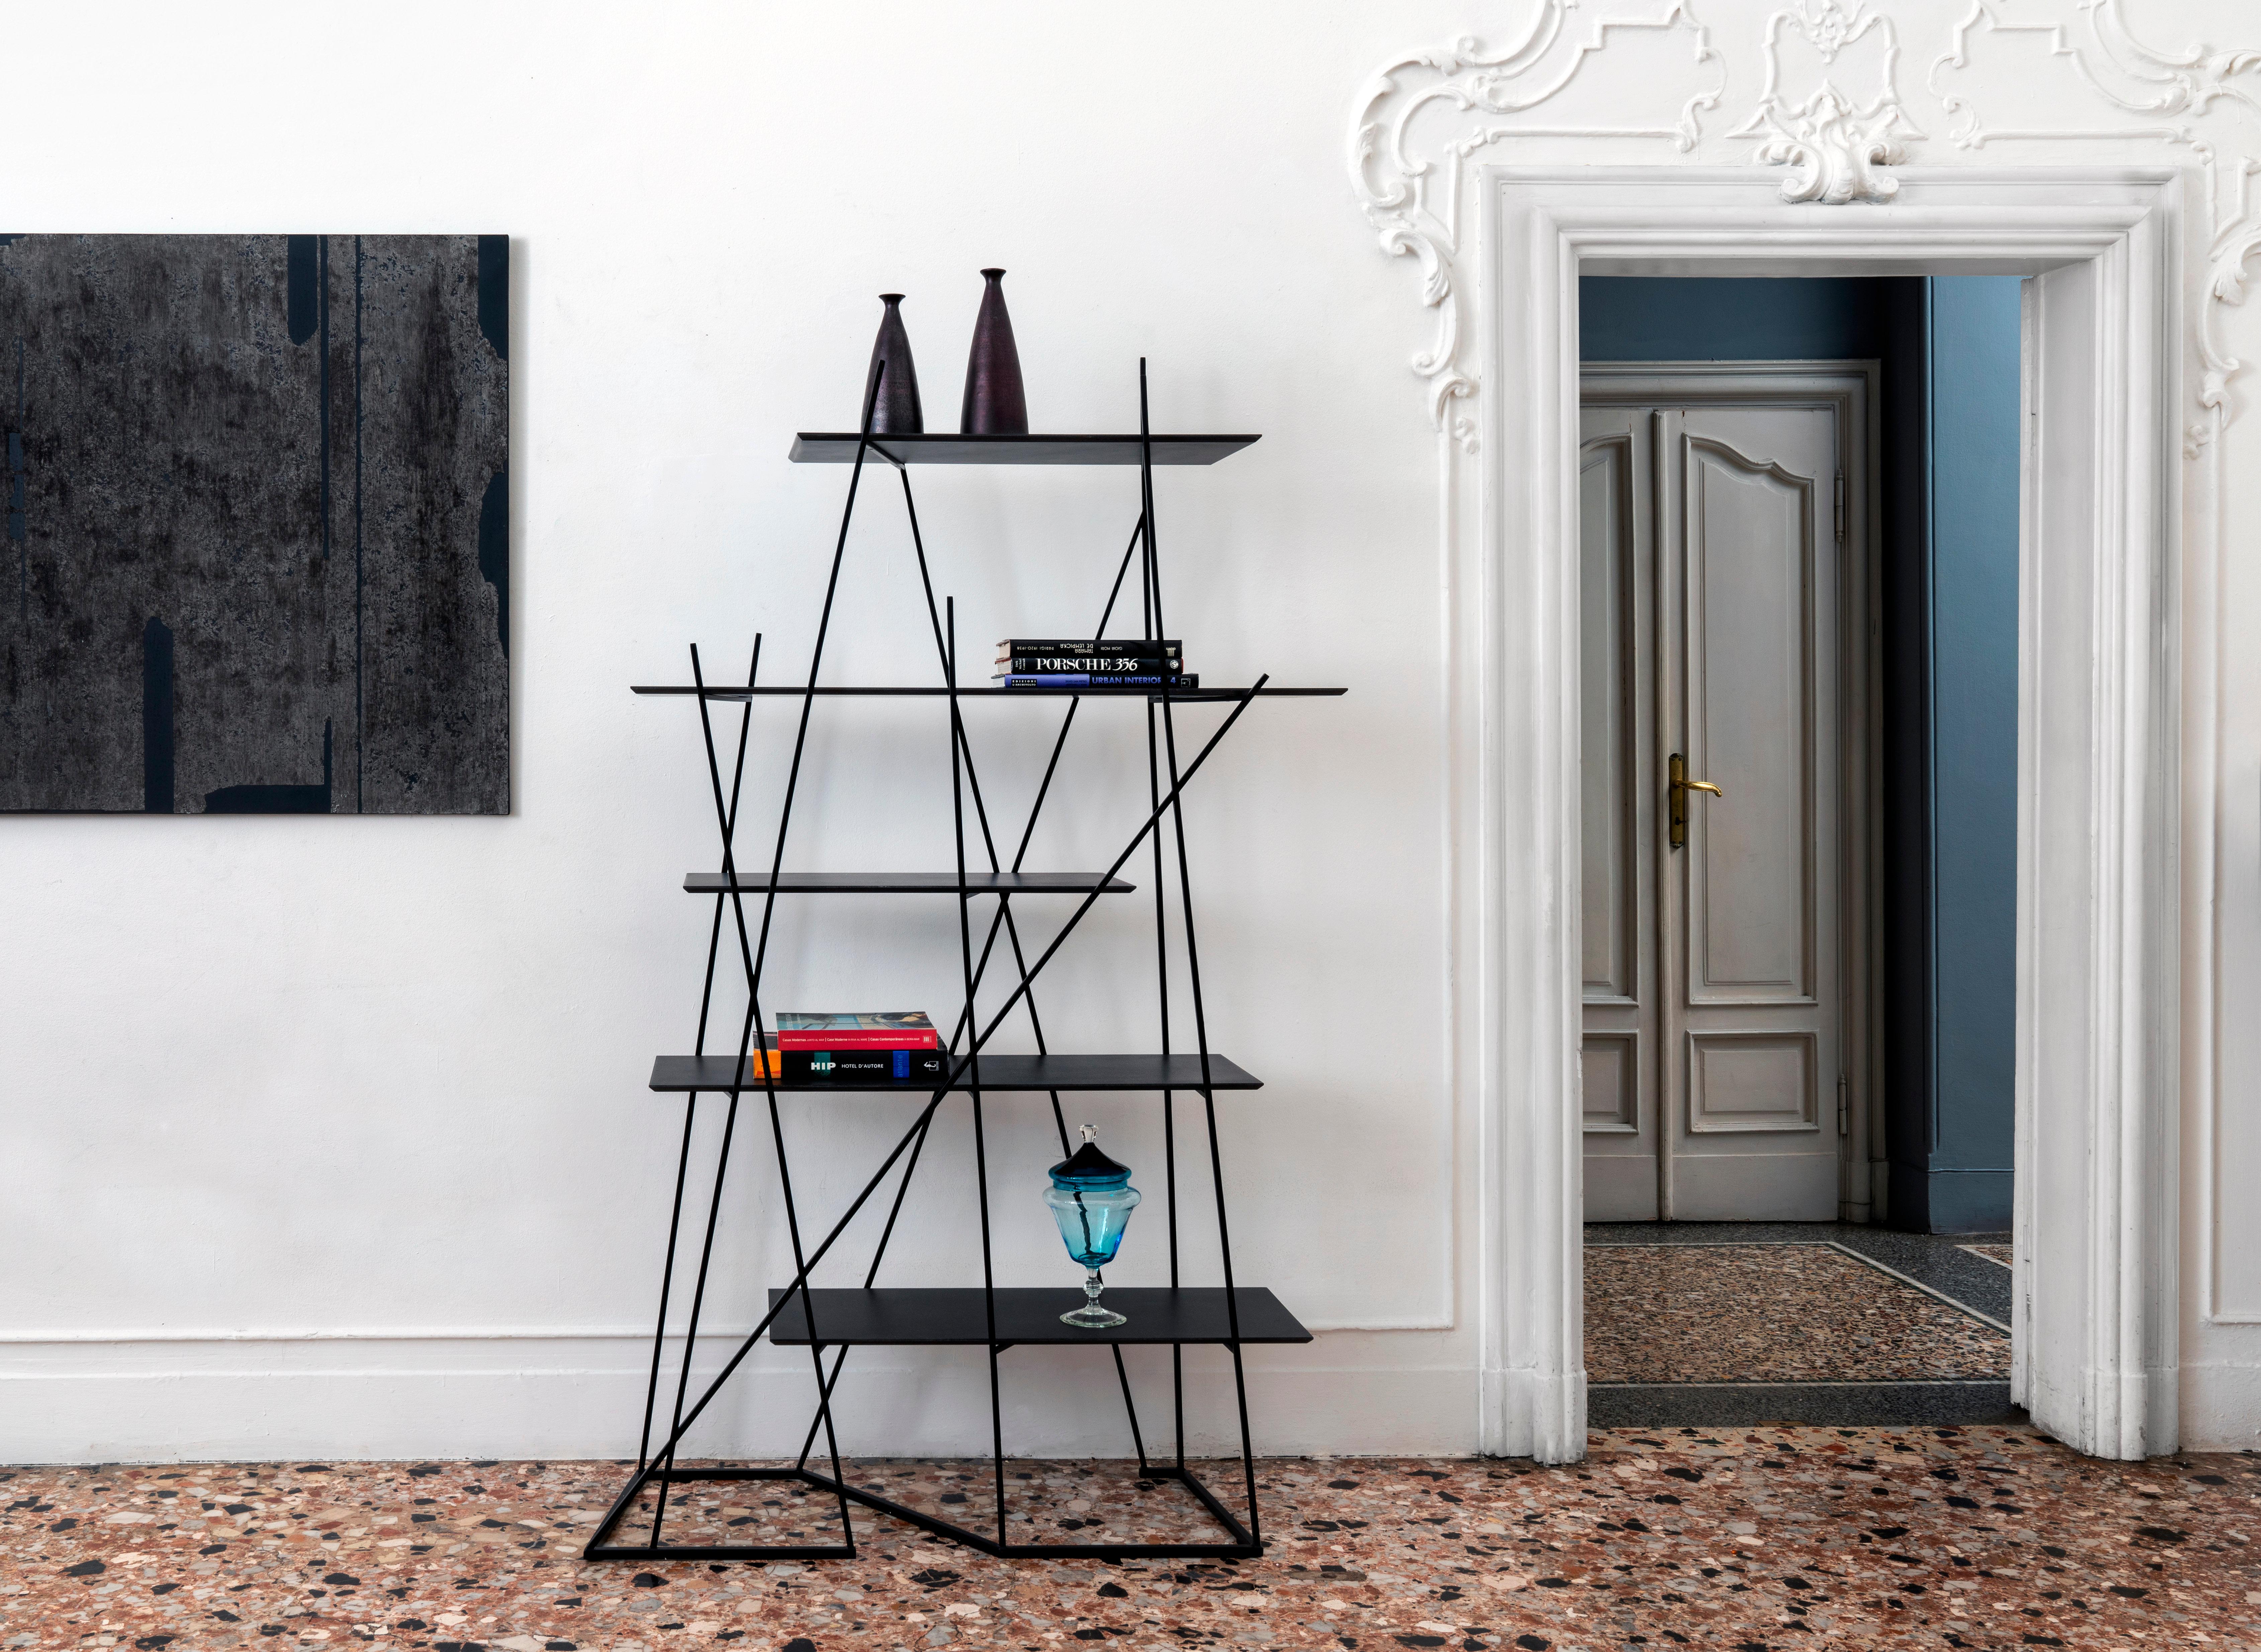 Bosco bookshelf by Mentemano
Dimensions: 116 x 42 x H 190.5 cm
Materials: Natural CDF

Mentemano is a design concept brand leading to a precise matter: is the “mente” (mind) leading the “mano” (hand) to create a piece of furniture or instead the